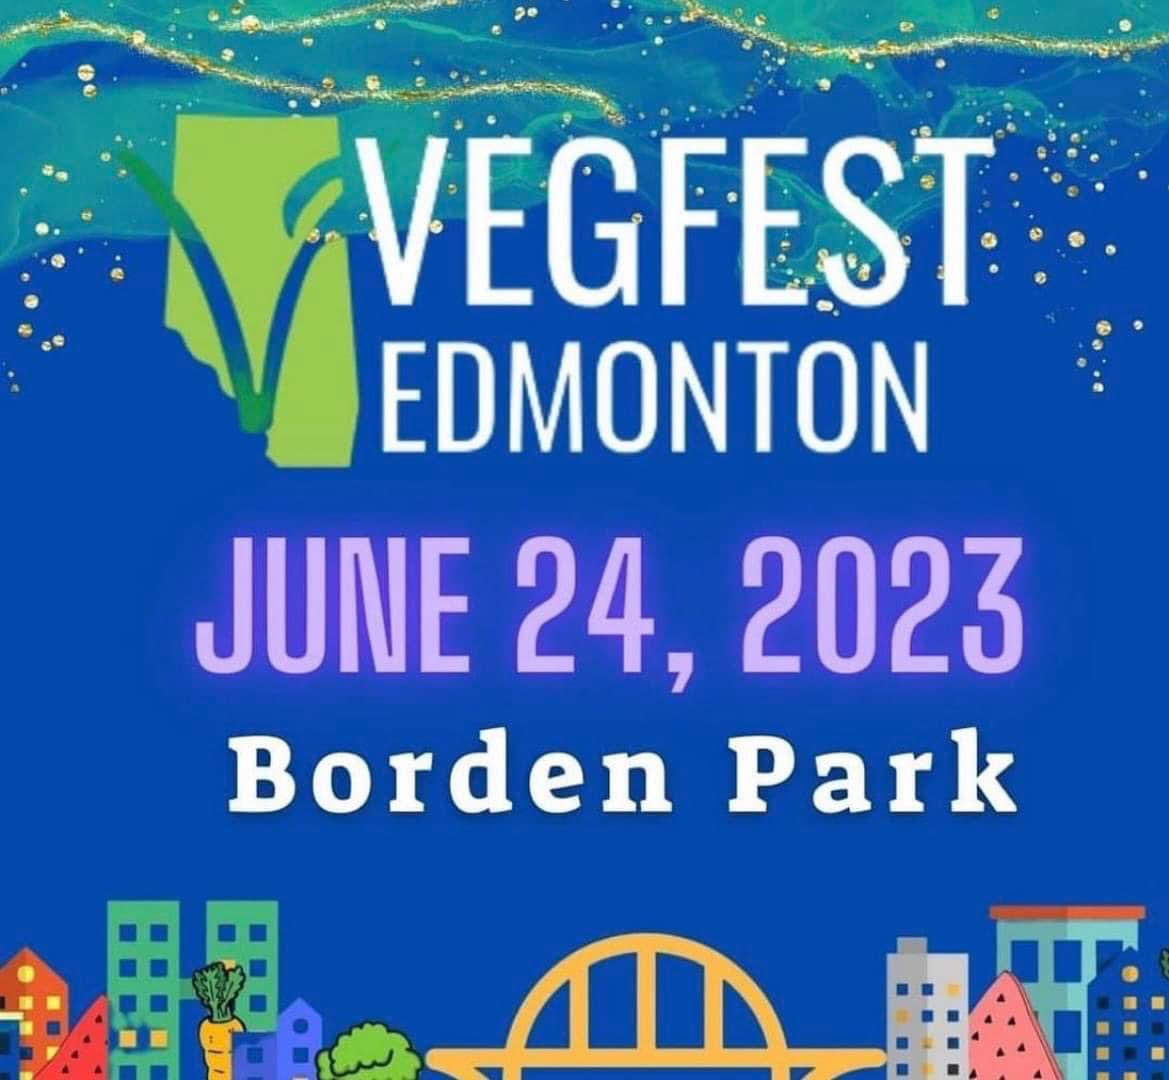 Join us at vegfest edmonton this CATURDAY, June 24 from 11 AM - 7 PM at Borden Park!We will be selling our fundraising merchandise and raising awareness about the work we do and our adoptable kitties in care. We look forward to seeing lots of our SAFE Team Supporters there! #yeg